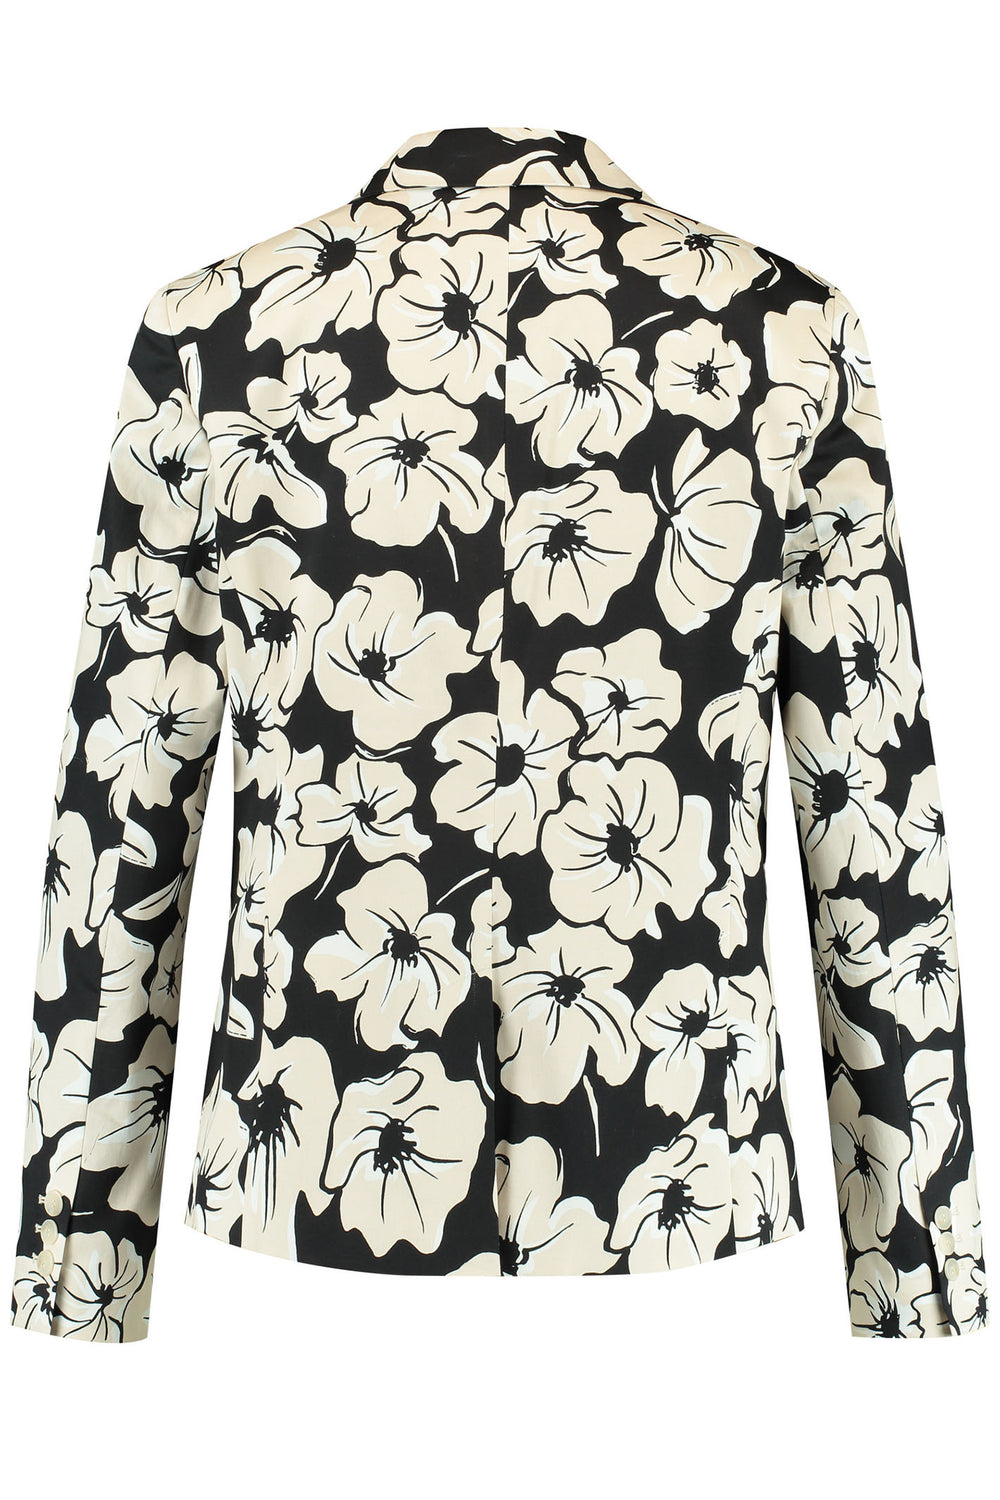 Gerry Weber 330053 Black & Taupe Hibiscus Jacket - Experience Boutique